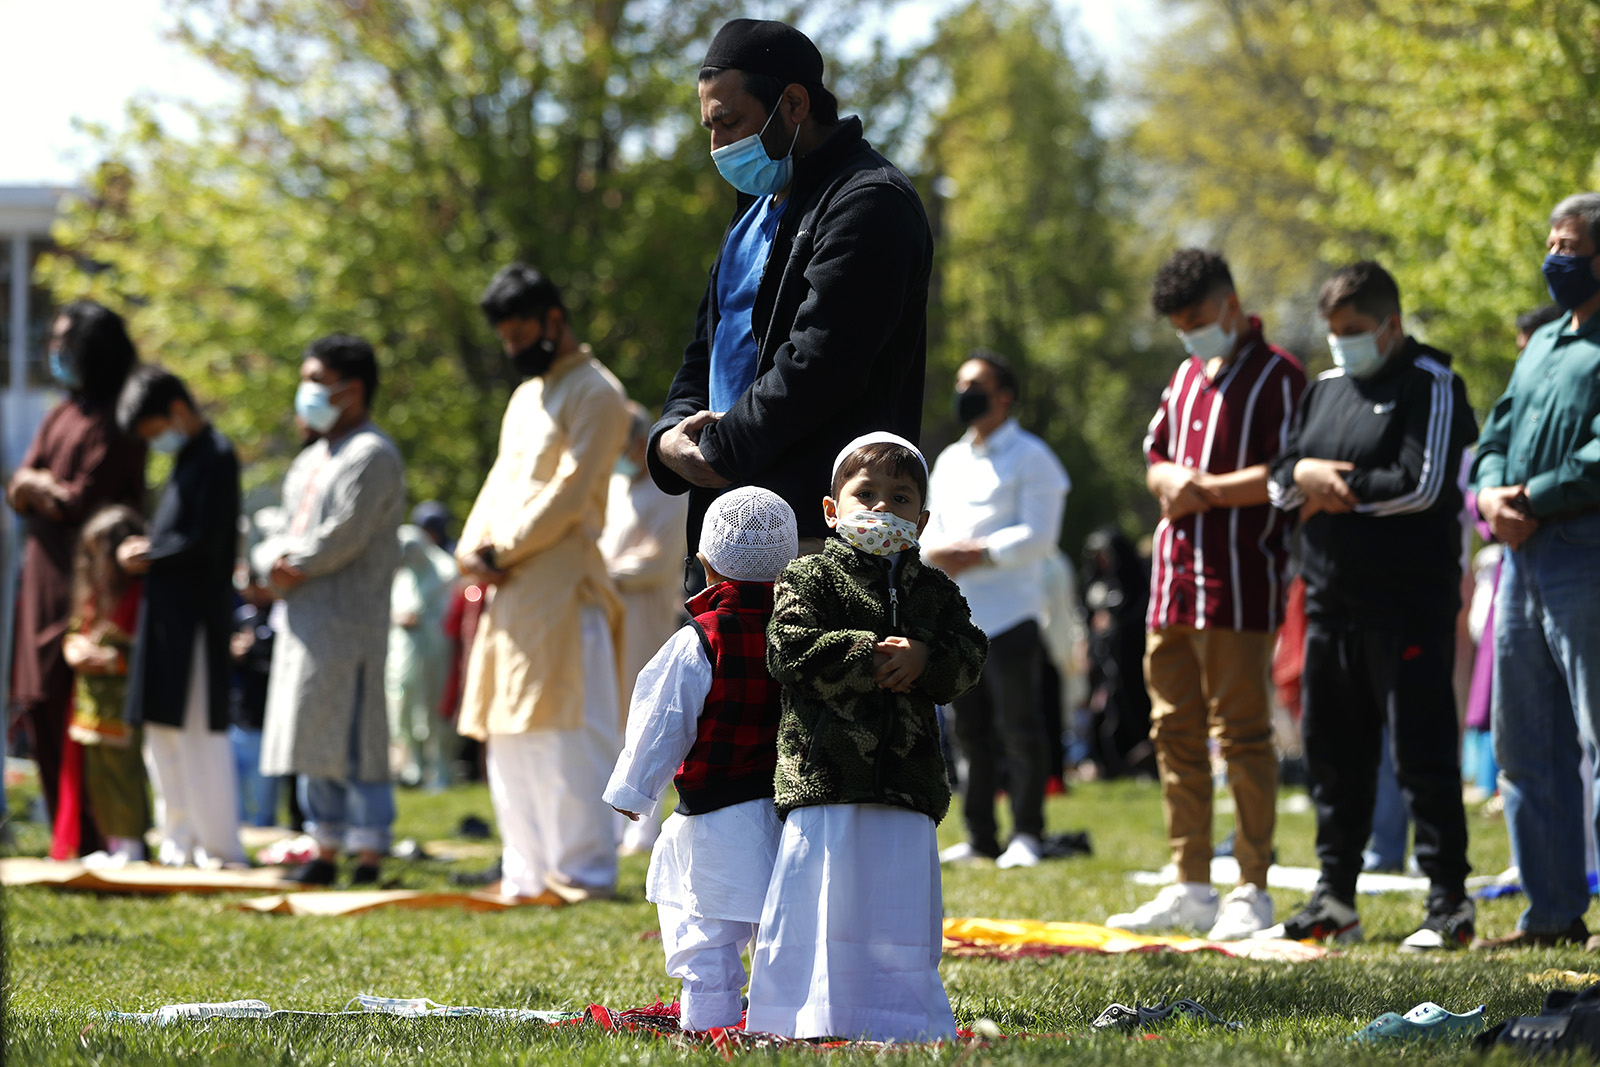 Two children stand with their father as he and other Muslims perform an Eid al-Fitr prayer in an outdoor open area, marking the end of the fasting month of Ramadan, May 13, 2021, in Morton Grove, Illinois. (AP Photo/Shafkat Anowar)